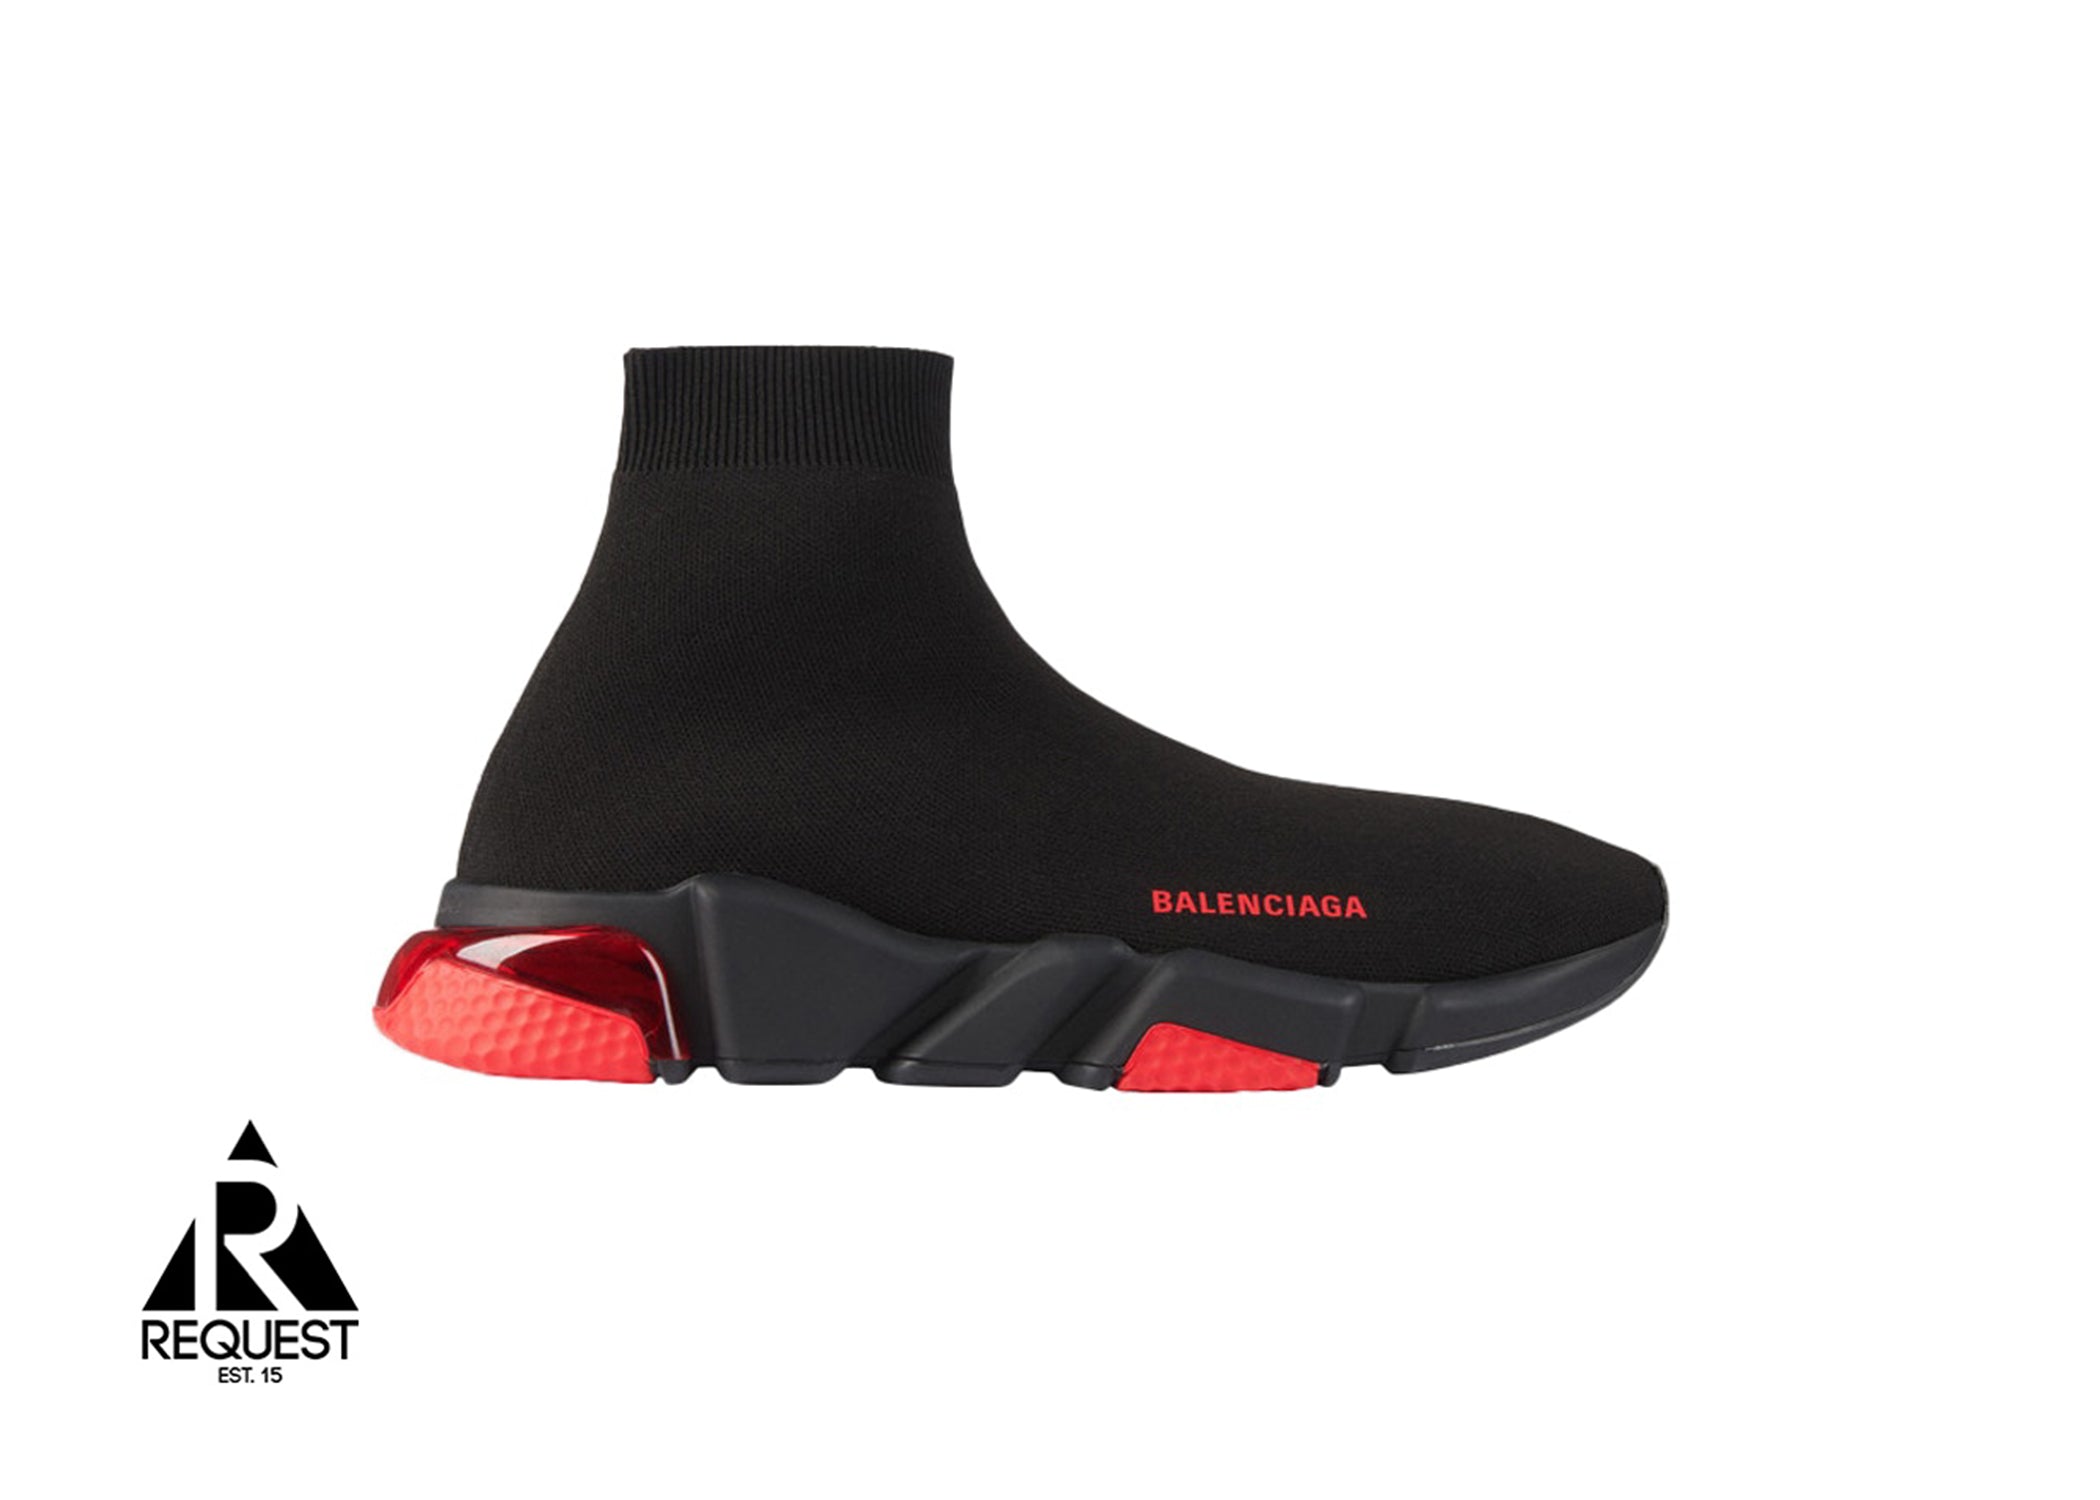 Intrekking klep Pef Balenciaga Speed Trainer “Black and Red Clear Sole” | Request